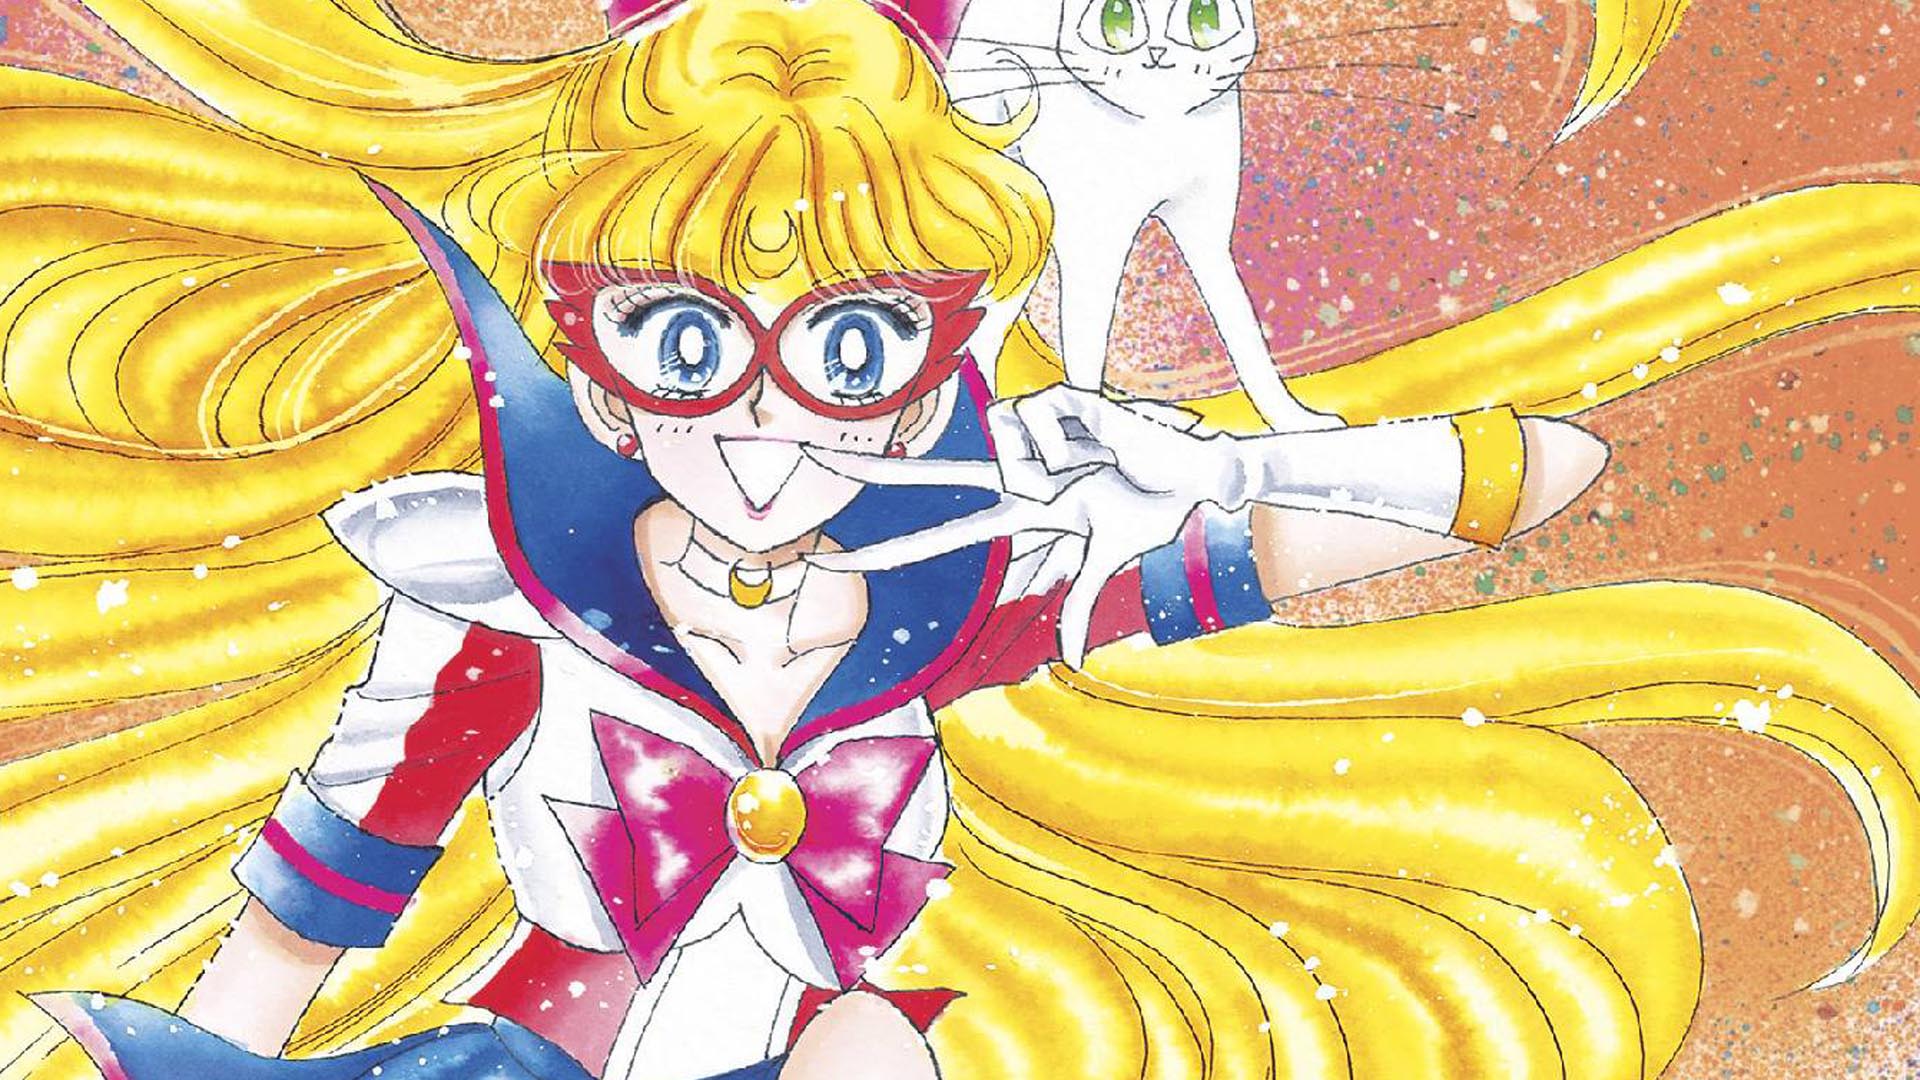 Sailor Moon: The Most Powerful Attacks Worth Transforming For